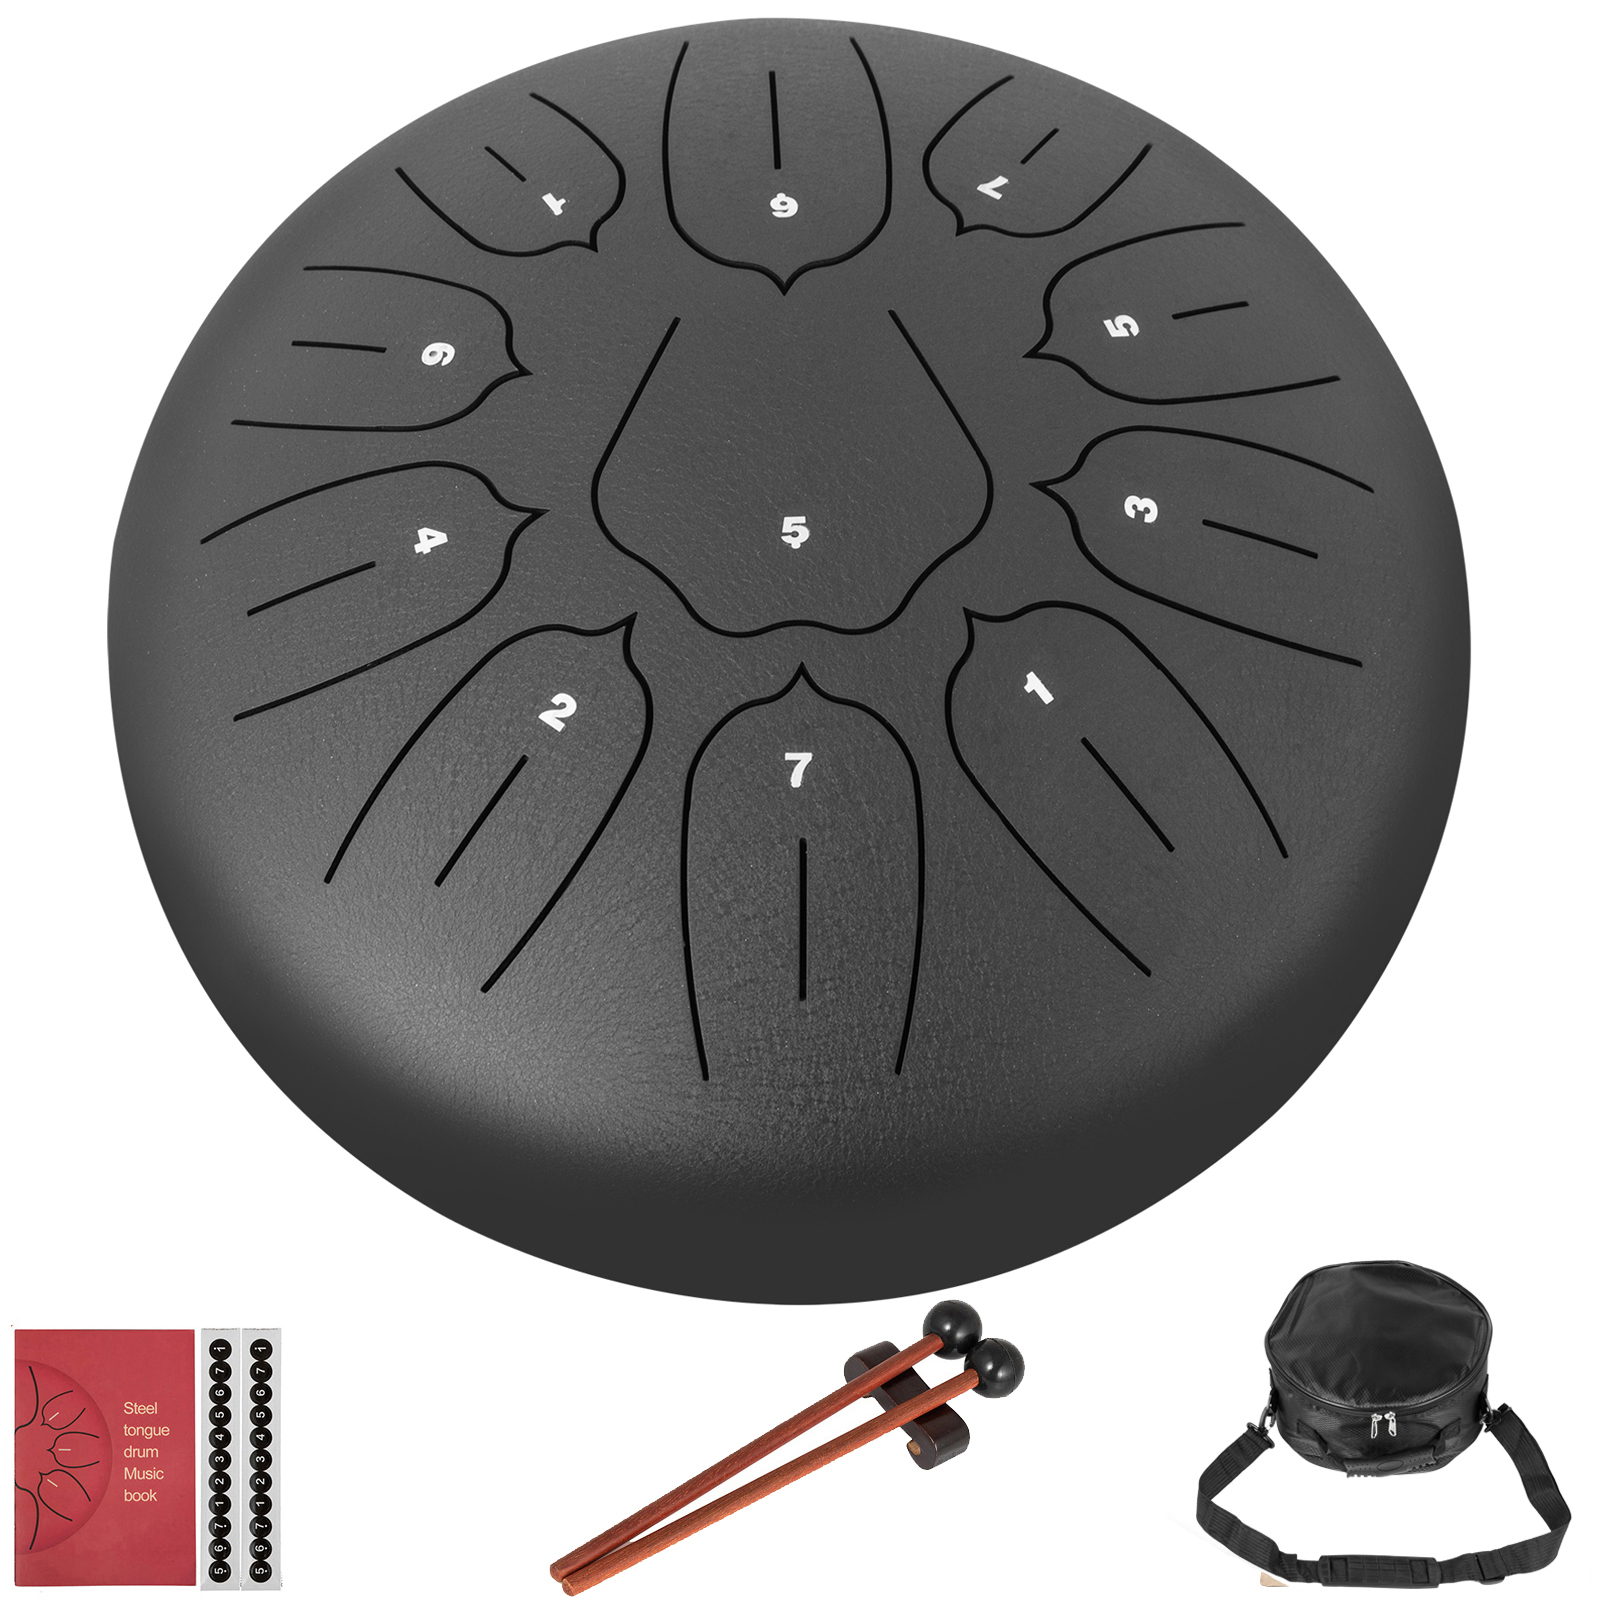 Hand Pan Drum with Drumsticks Carrying Bag and 6 Finger Cover Friends Adults Percussion Instrument with Drum Mallets for Kids Steel Tongue Drum 11 Notes 6 Inch Black 